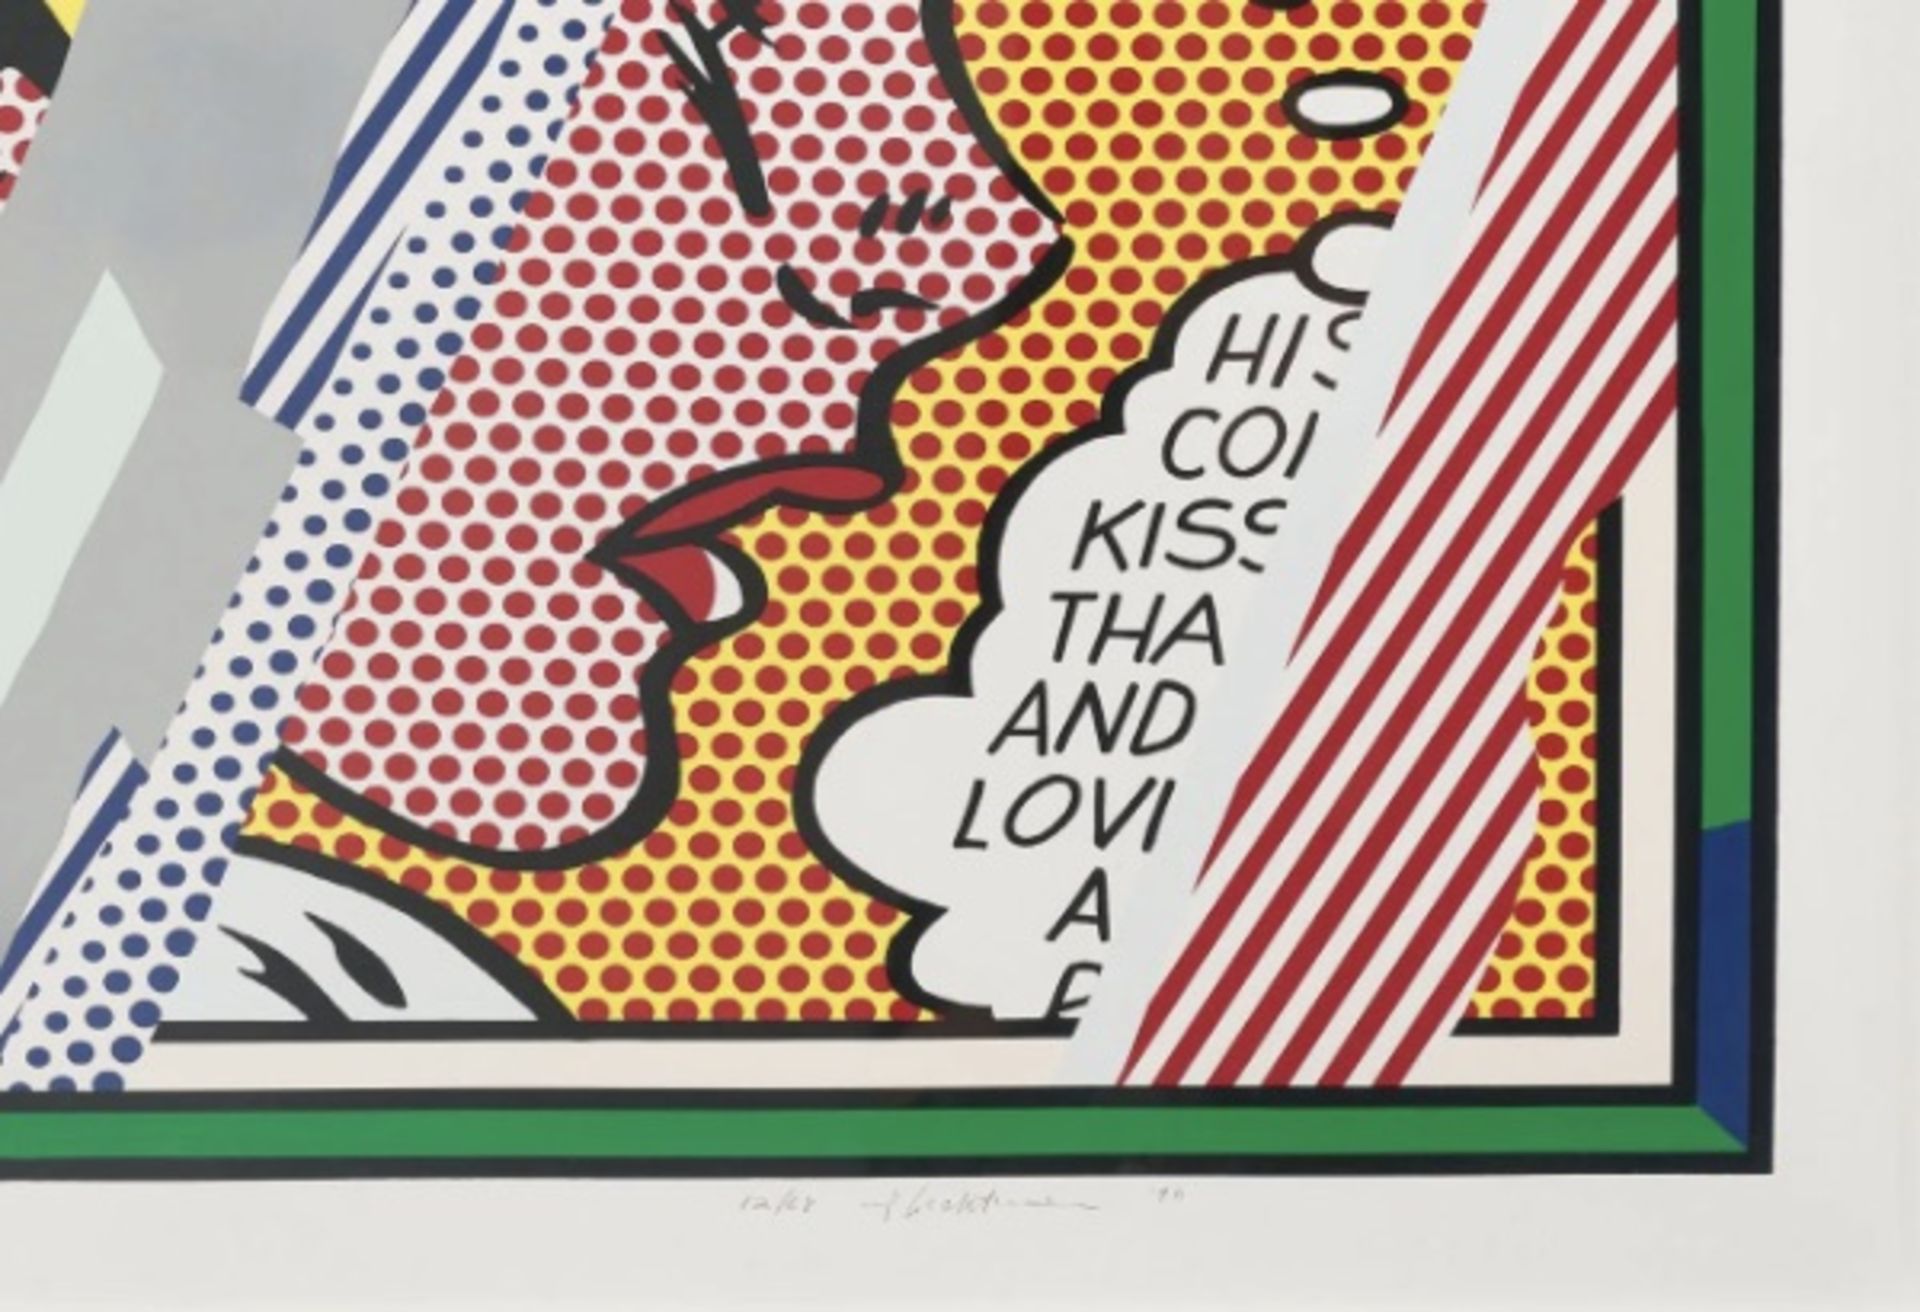 Roy Lichtenstein "Reflections on Girl, 1990" Plate Signed Offset Lithograph - Image 2 of 5